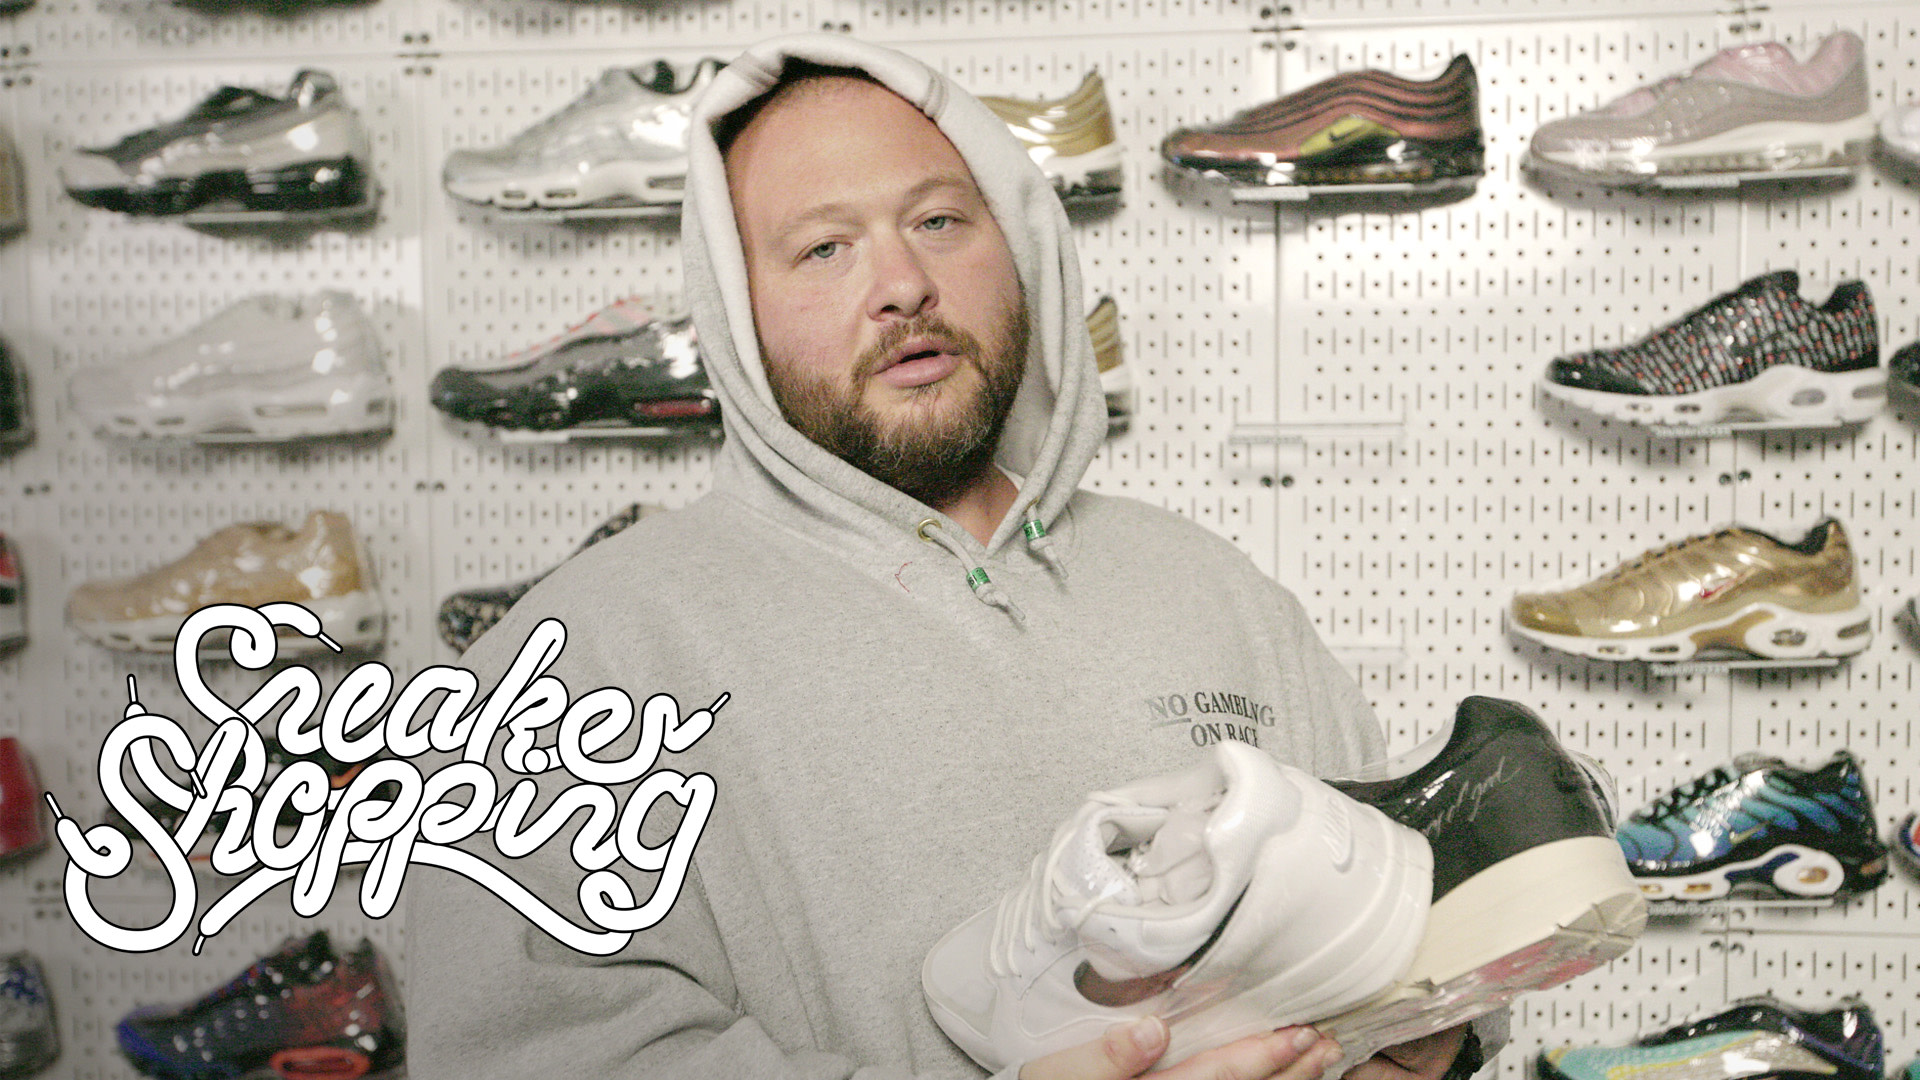 action bronson sneakers